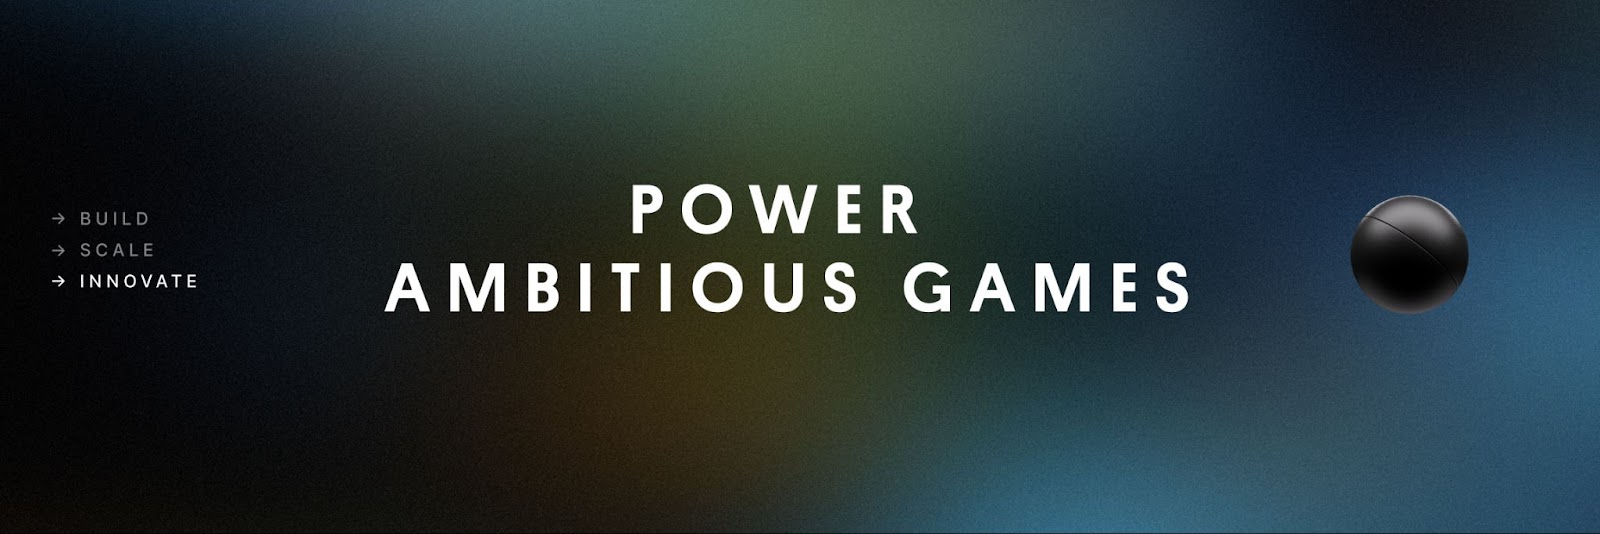 Power ambitious games